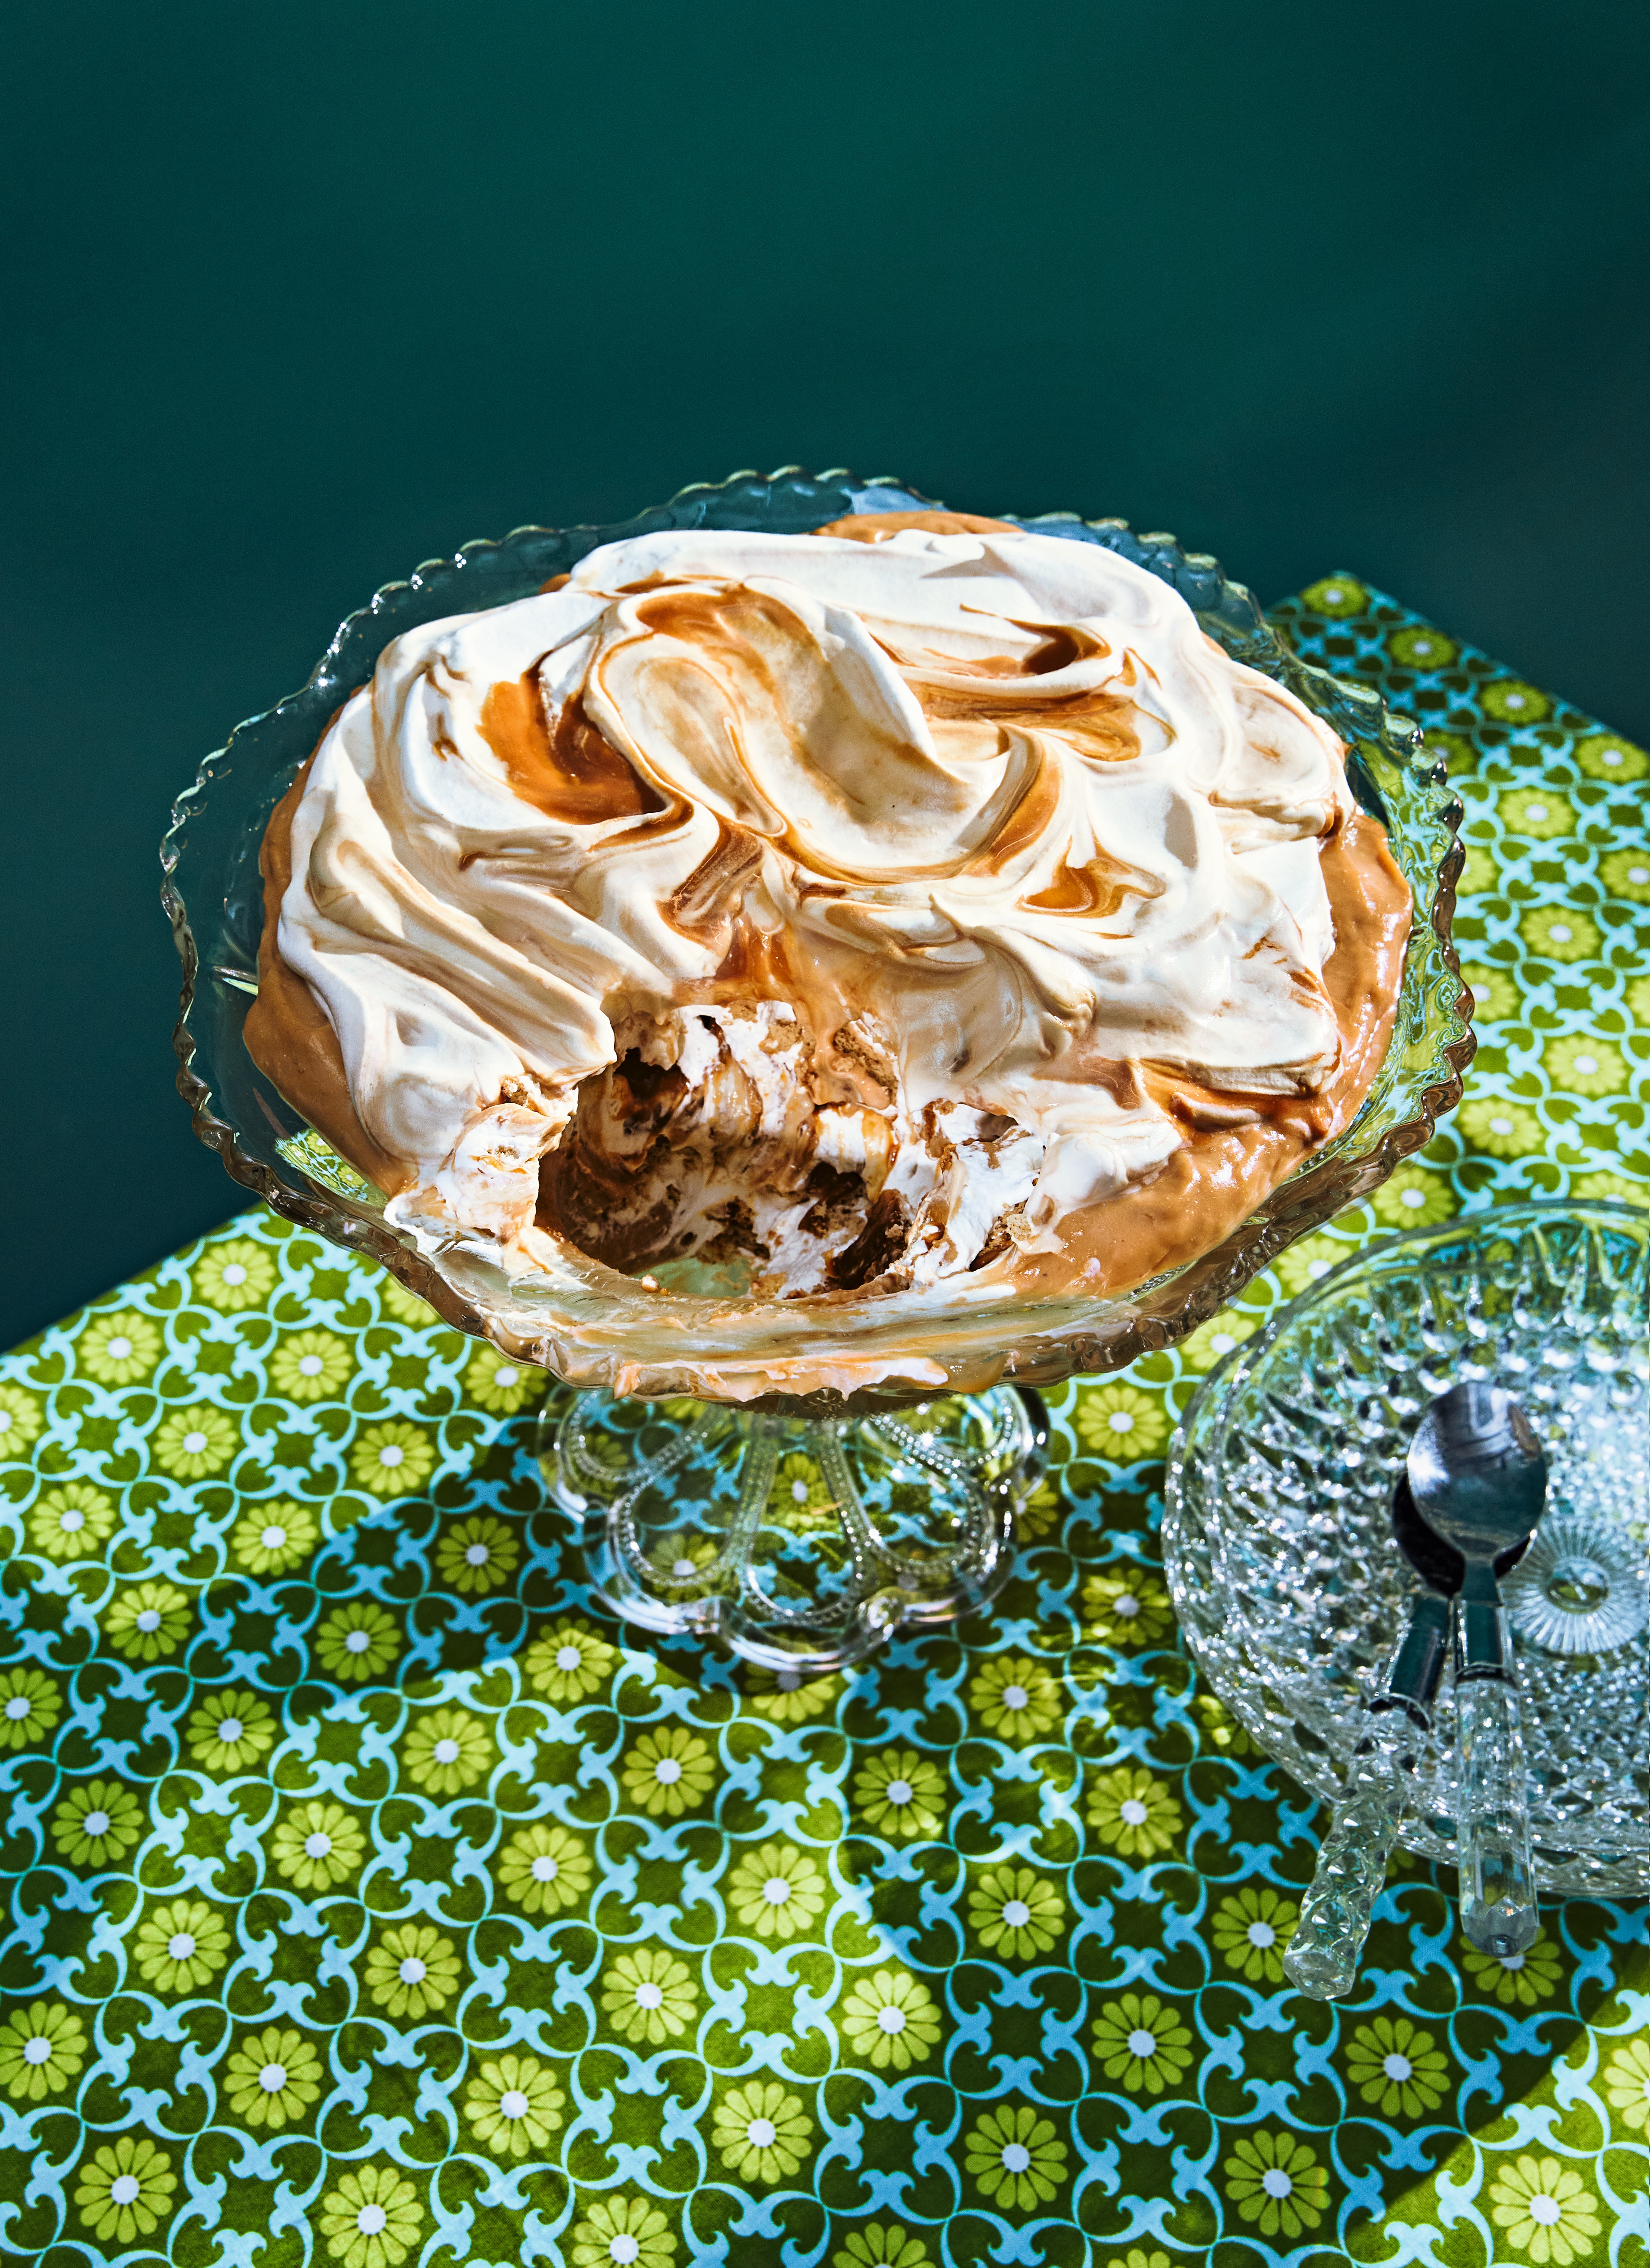 A banoffee pudding in a glass serving dish; some of the pie has been scooped out.